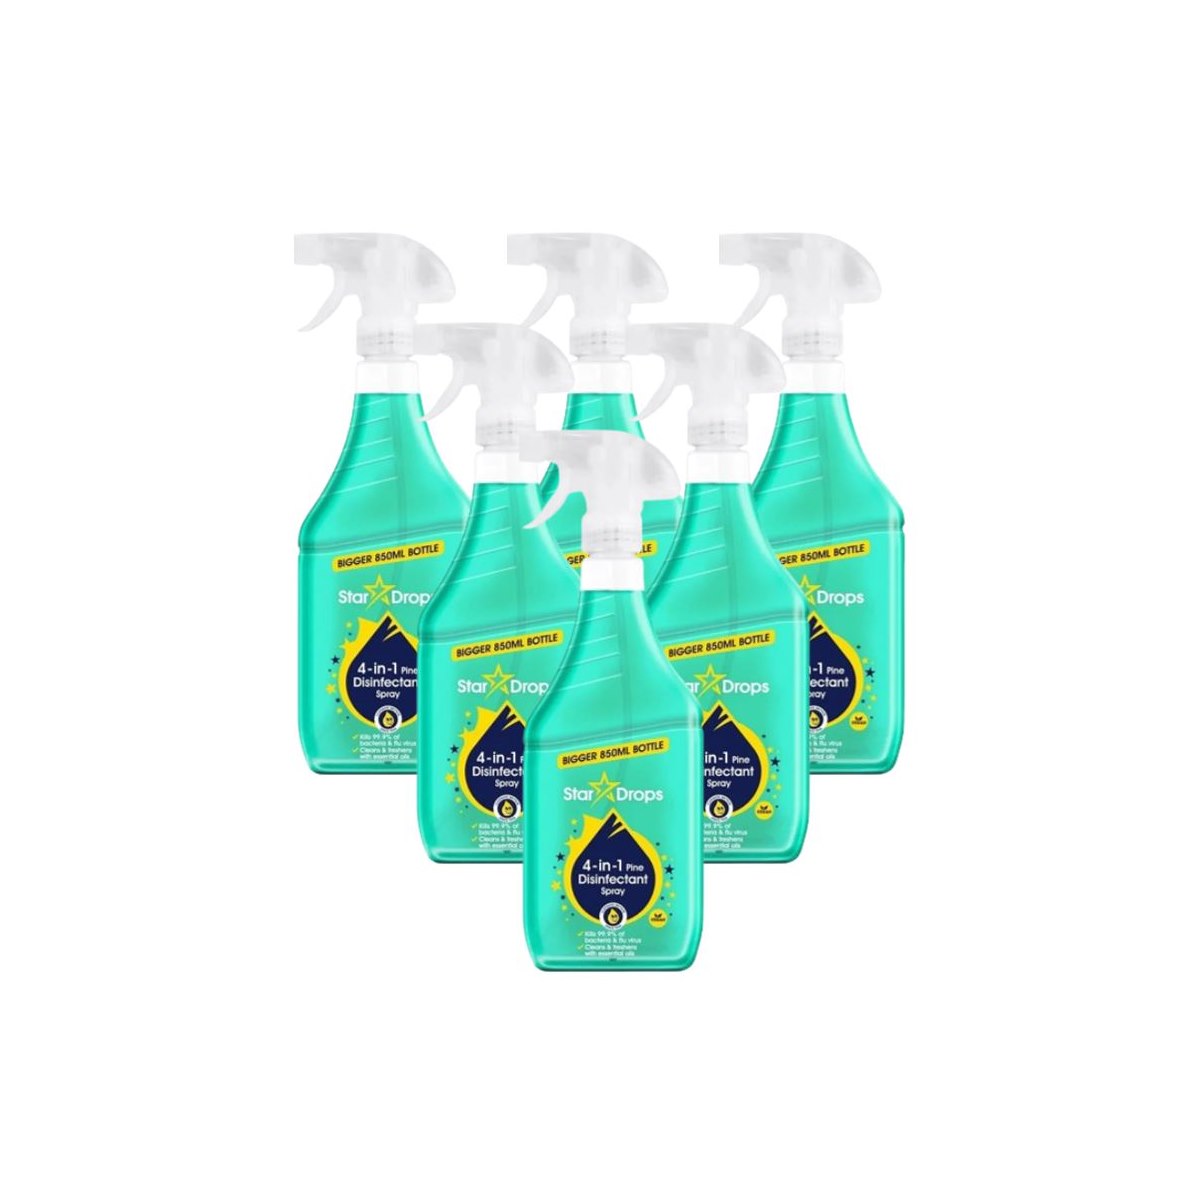 Case of 6 x Stardrops Pine Scented Disinfectant 850ml